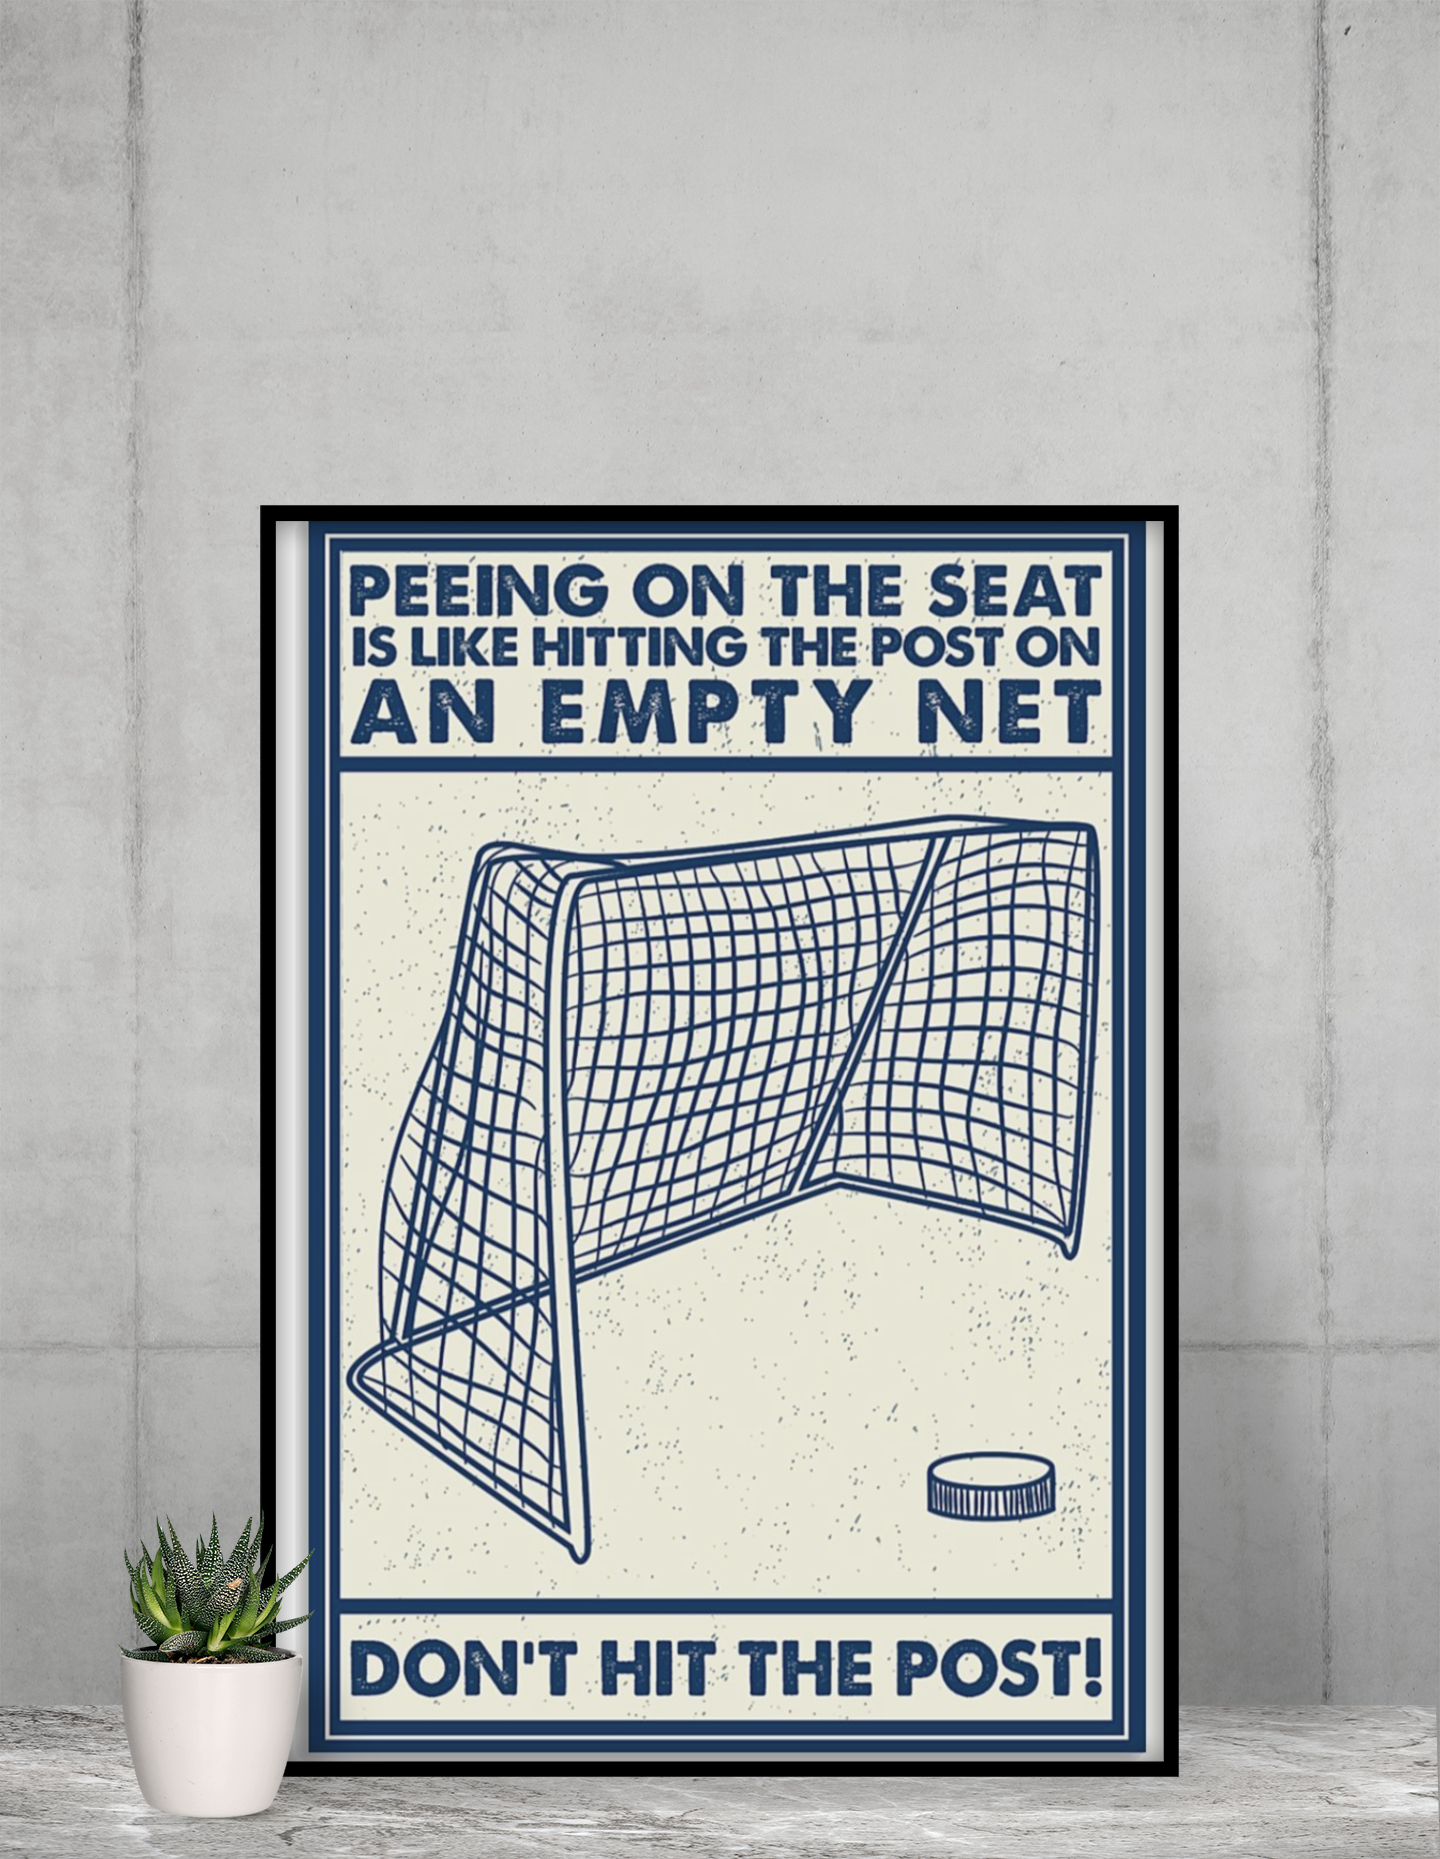 Hockey peeing on the seat don't hit the post poster 1